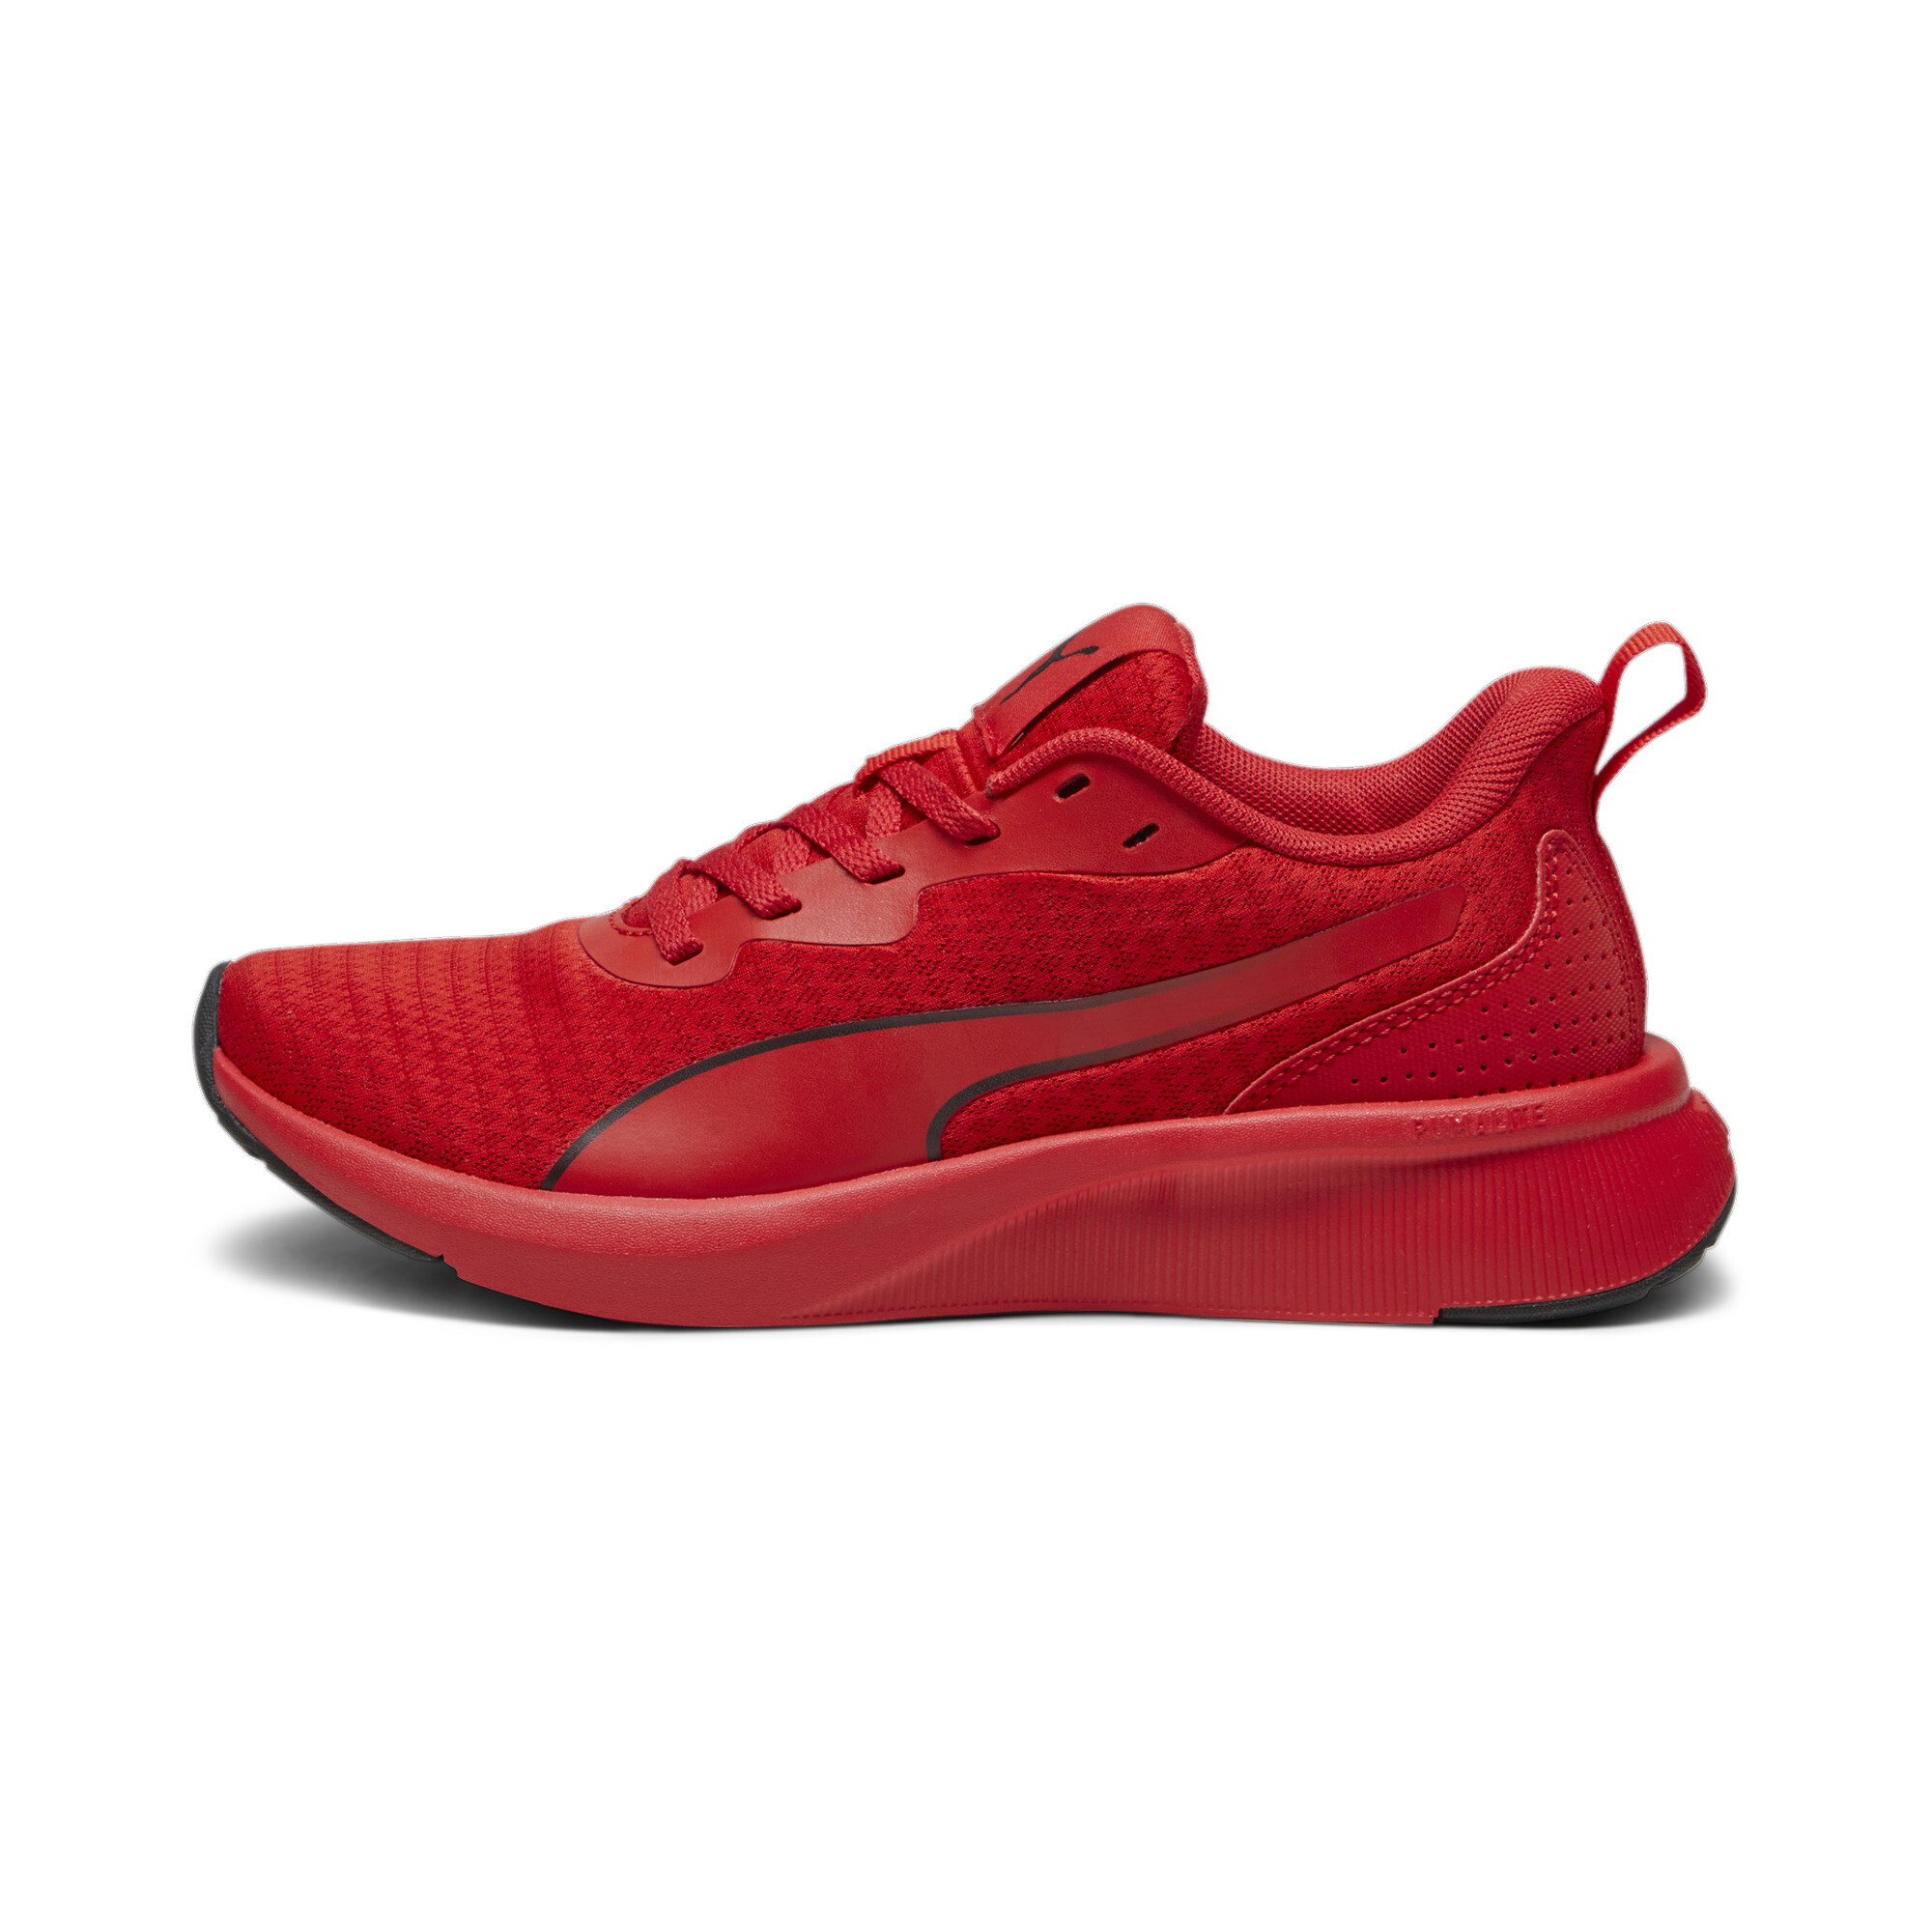 Puma Flyer Lite Youth Sneakers, Red, Size 39, Shoes